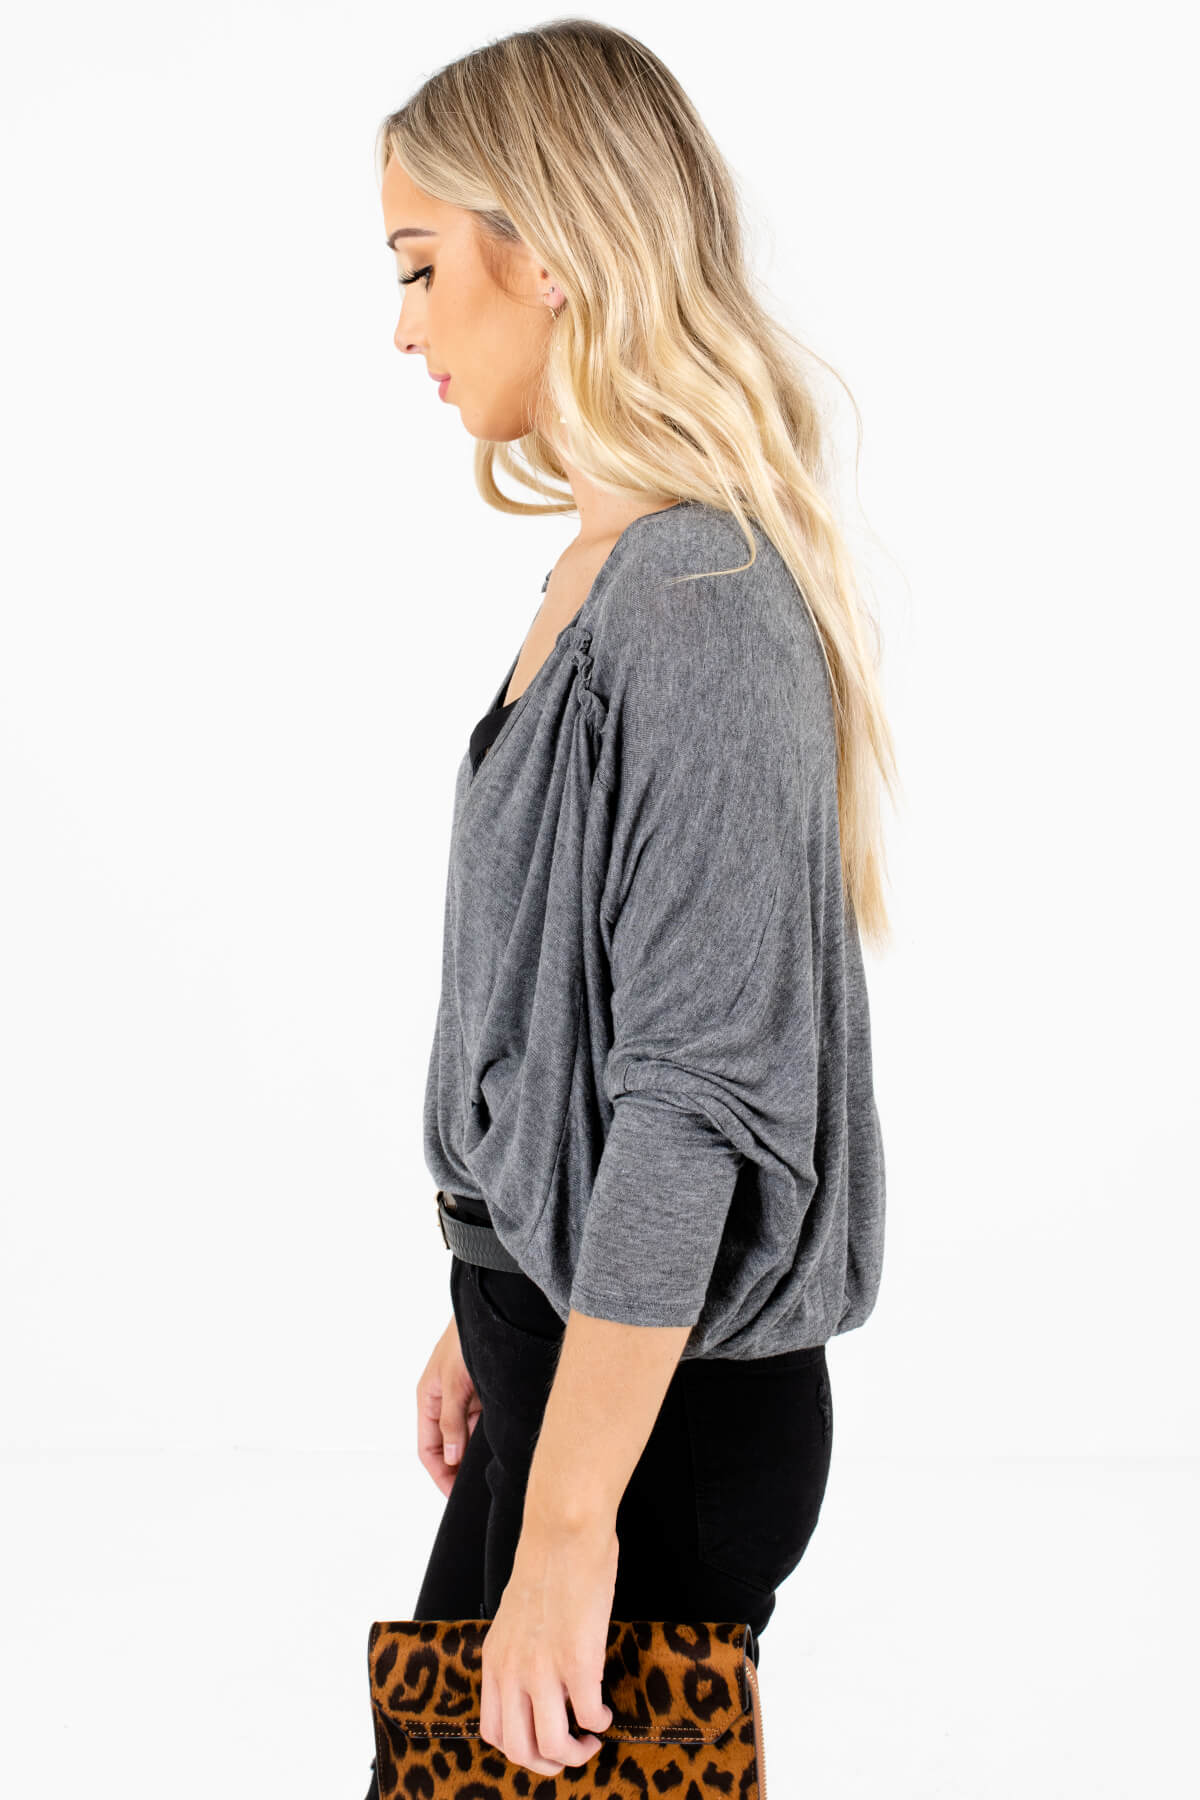 Heather Gray Drop Should Style Boutique Tops for Women